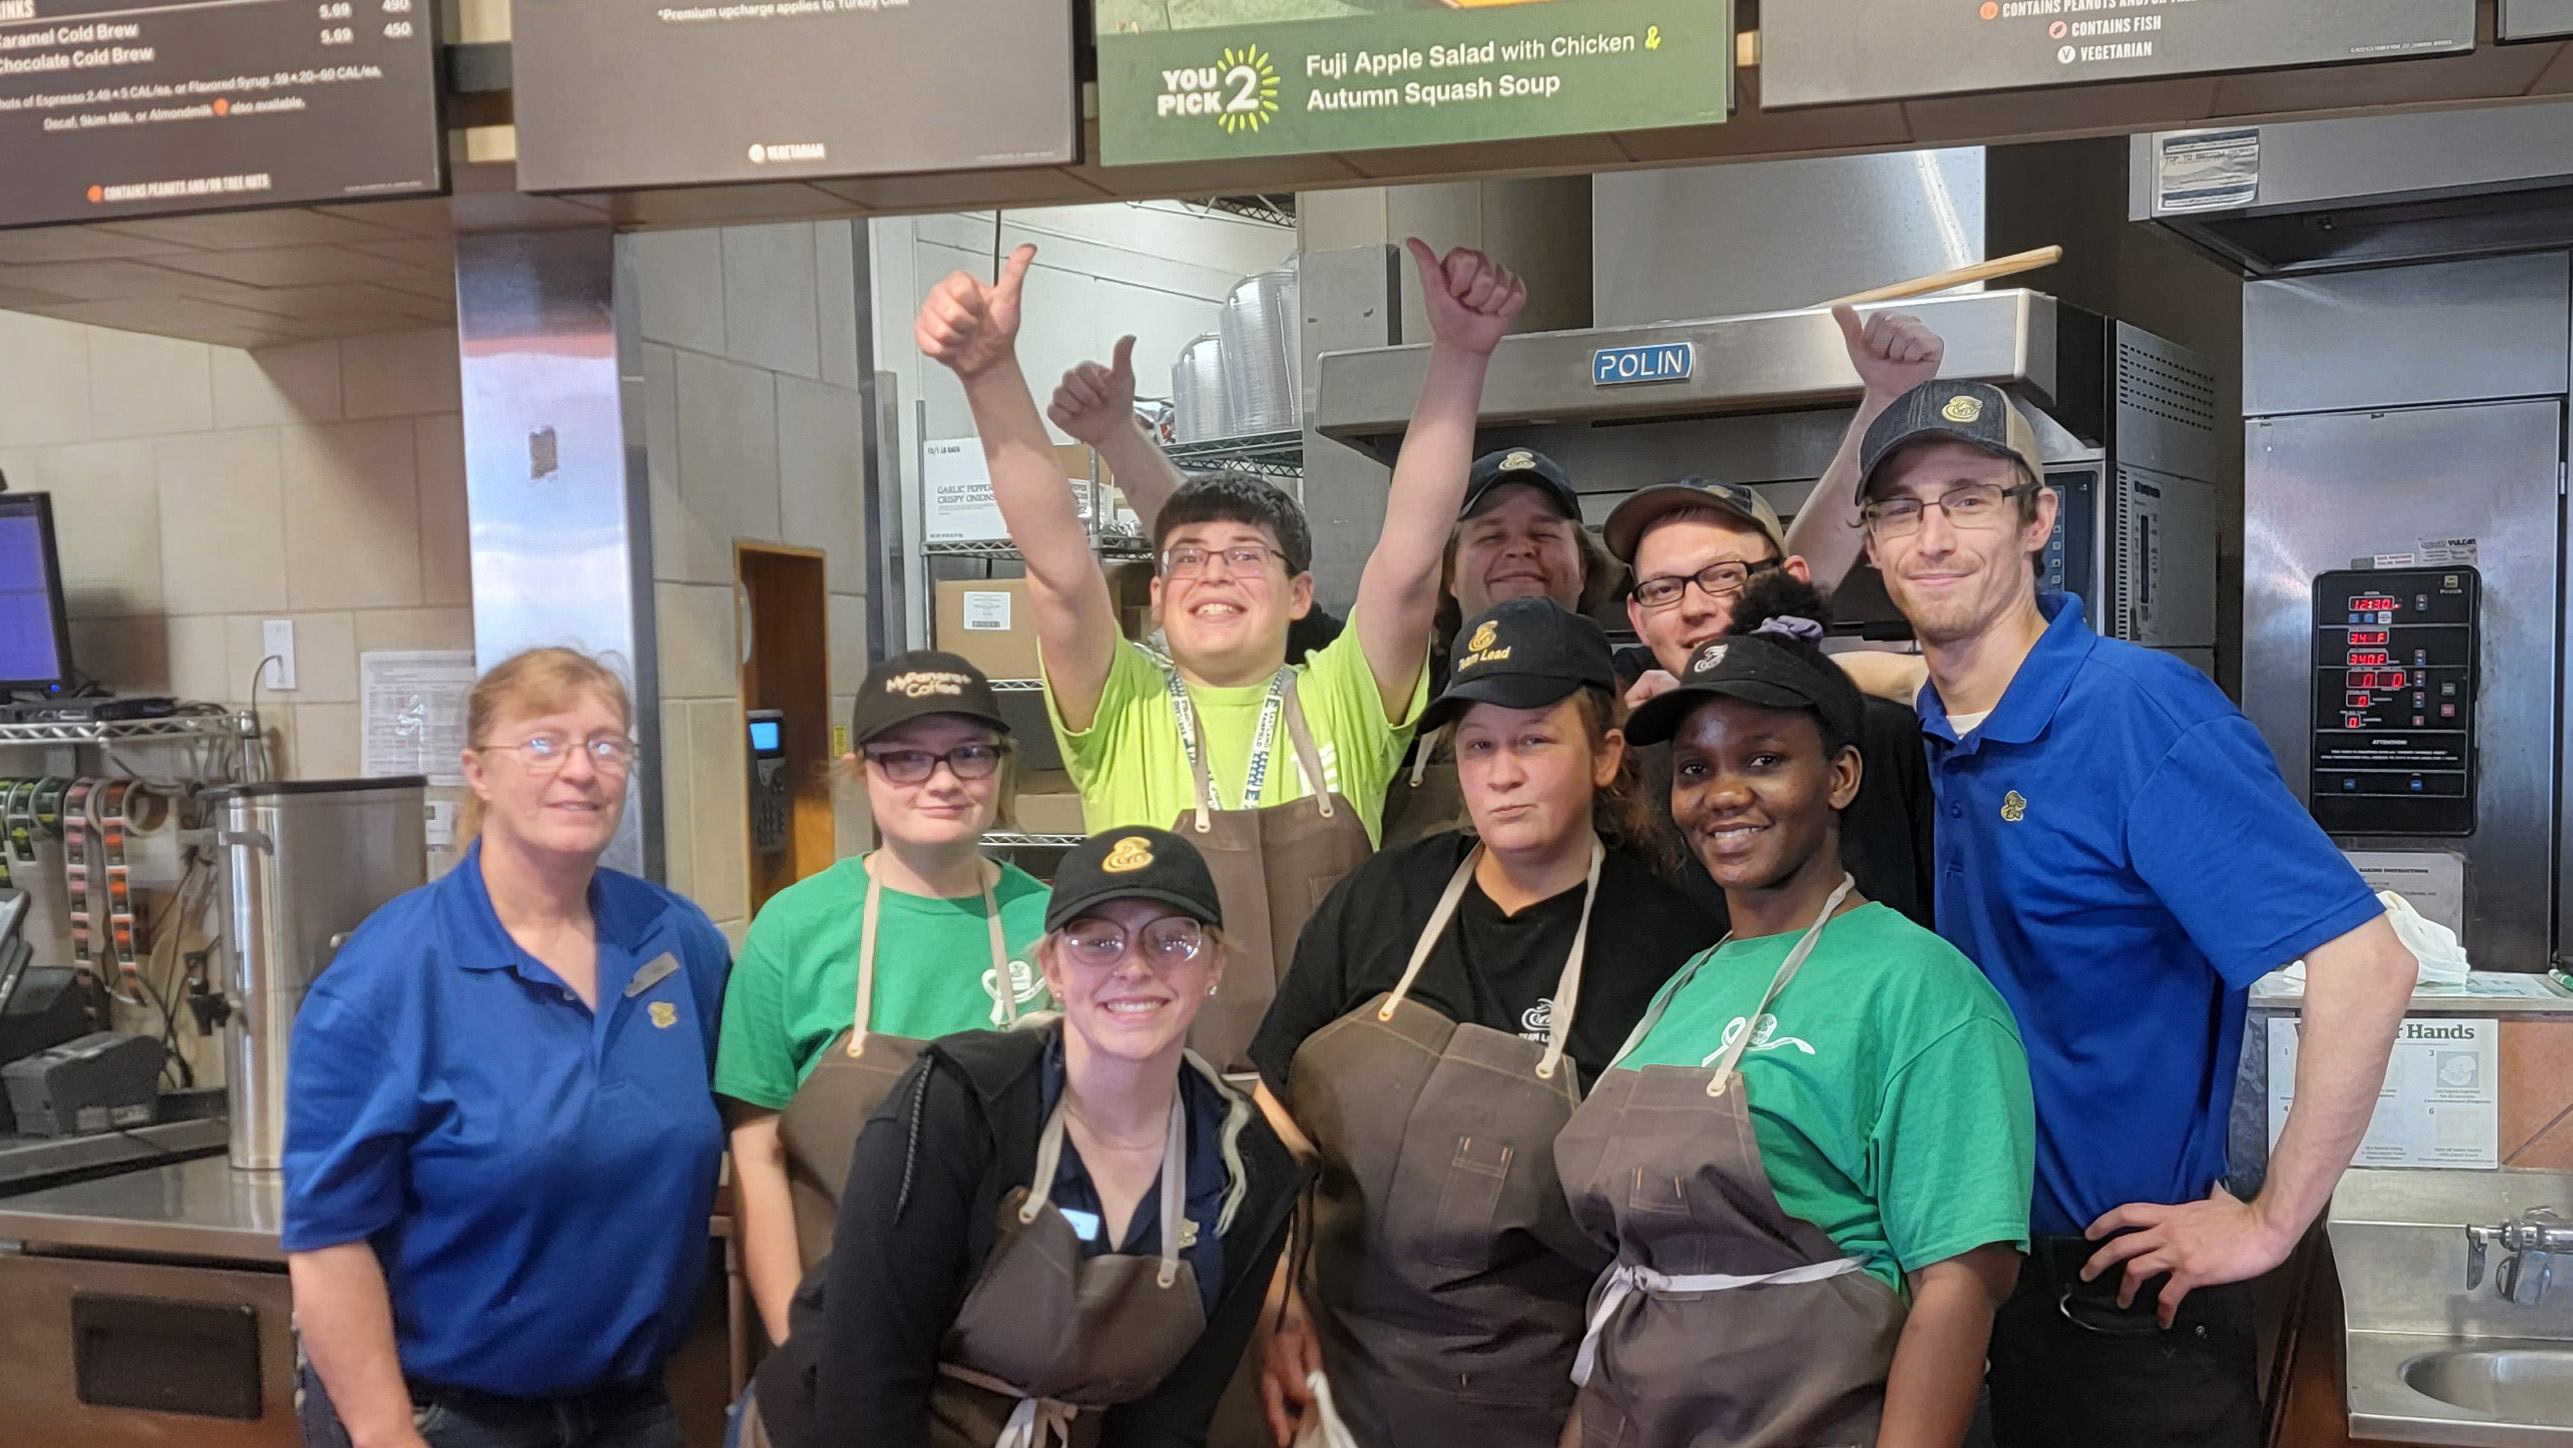 An Employability Prep student raises his hand in celebration among a group of his colleagues at Panera Bread